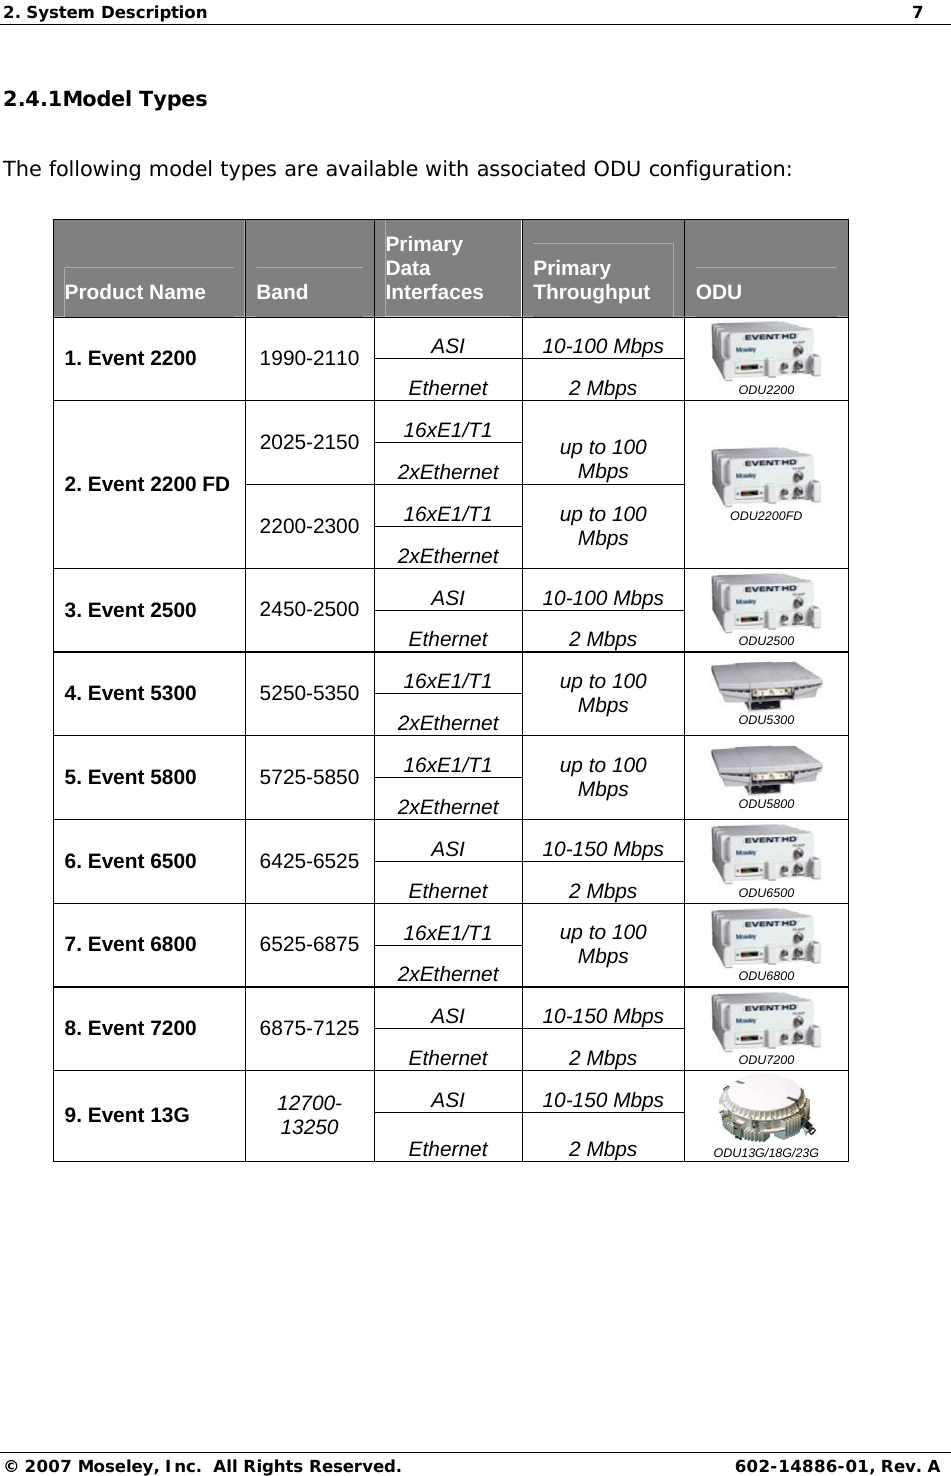 2. System Description  7 © 2007 Moseley, Inc.  All Rights Reserved. 602-14886-01, Rev. A 2.4.1Model Types  The following model types are available with associated ODU configuration:  Product Name  Band Primary Data Interfaces  Primary Throughput  ODU ASI 10-100 Mbps 1. Event 2200  1990-2110 Ethernet 2 Mbps   ODU2200 16xE1/T1 2025-2150 2xEthernet  up to 100 Mbps 16xE1/T1 2. Event 2200 FD 2200-2300 2xEthernet up to 100 Mbps  ODU2200FD ASI 10-100 Mbps 3. Event 2500  2450-2500 Ethernet 2 Mbps   ODU2500 16xE1/T1 4. Event 5300  5250-5350 2xEthernet up to 100 Mbps   ODU5300 16xE1/T1 5. Event 5800  5725-5850 2xEthernet up to 100 Mbps   ODU5800 ASI 10-150 Mbps 6. Event 6500  6425-6525 Ethernet 2 Mbps   ODU6500 16xE1/T1 7. Event 6800  6525-6875 2xEthernet up to 100 Mbps   ODU6800 ASI 10-150 Mbps 8. Event 7200  6875-7125 Ethernet 2 Mbps   ODU7200 ASI 10-150 Mbps 9. Event 13G  12700-13250  Ethernet 2 Mbps   ODU13G/18G/23G  